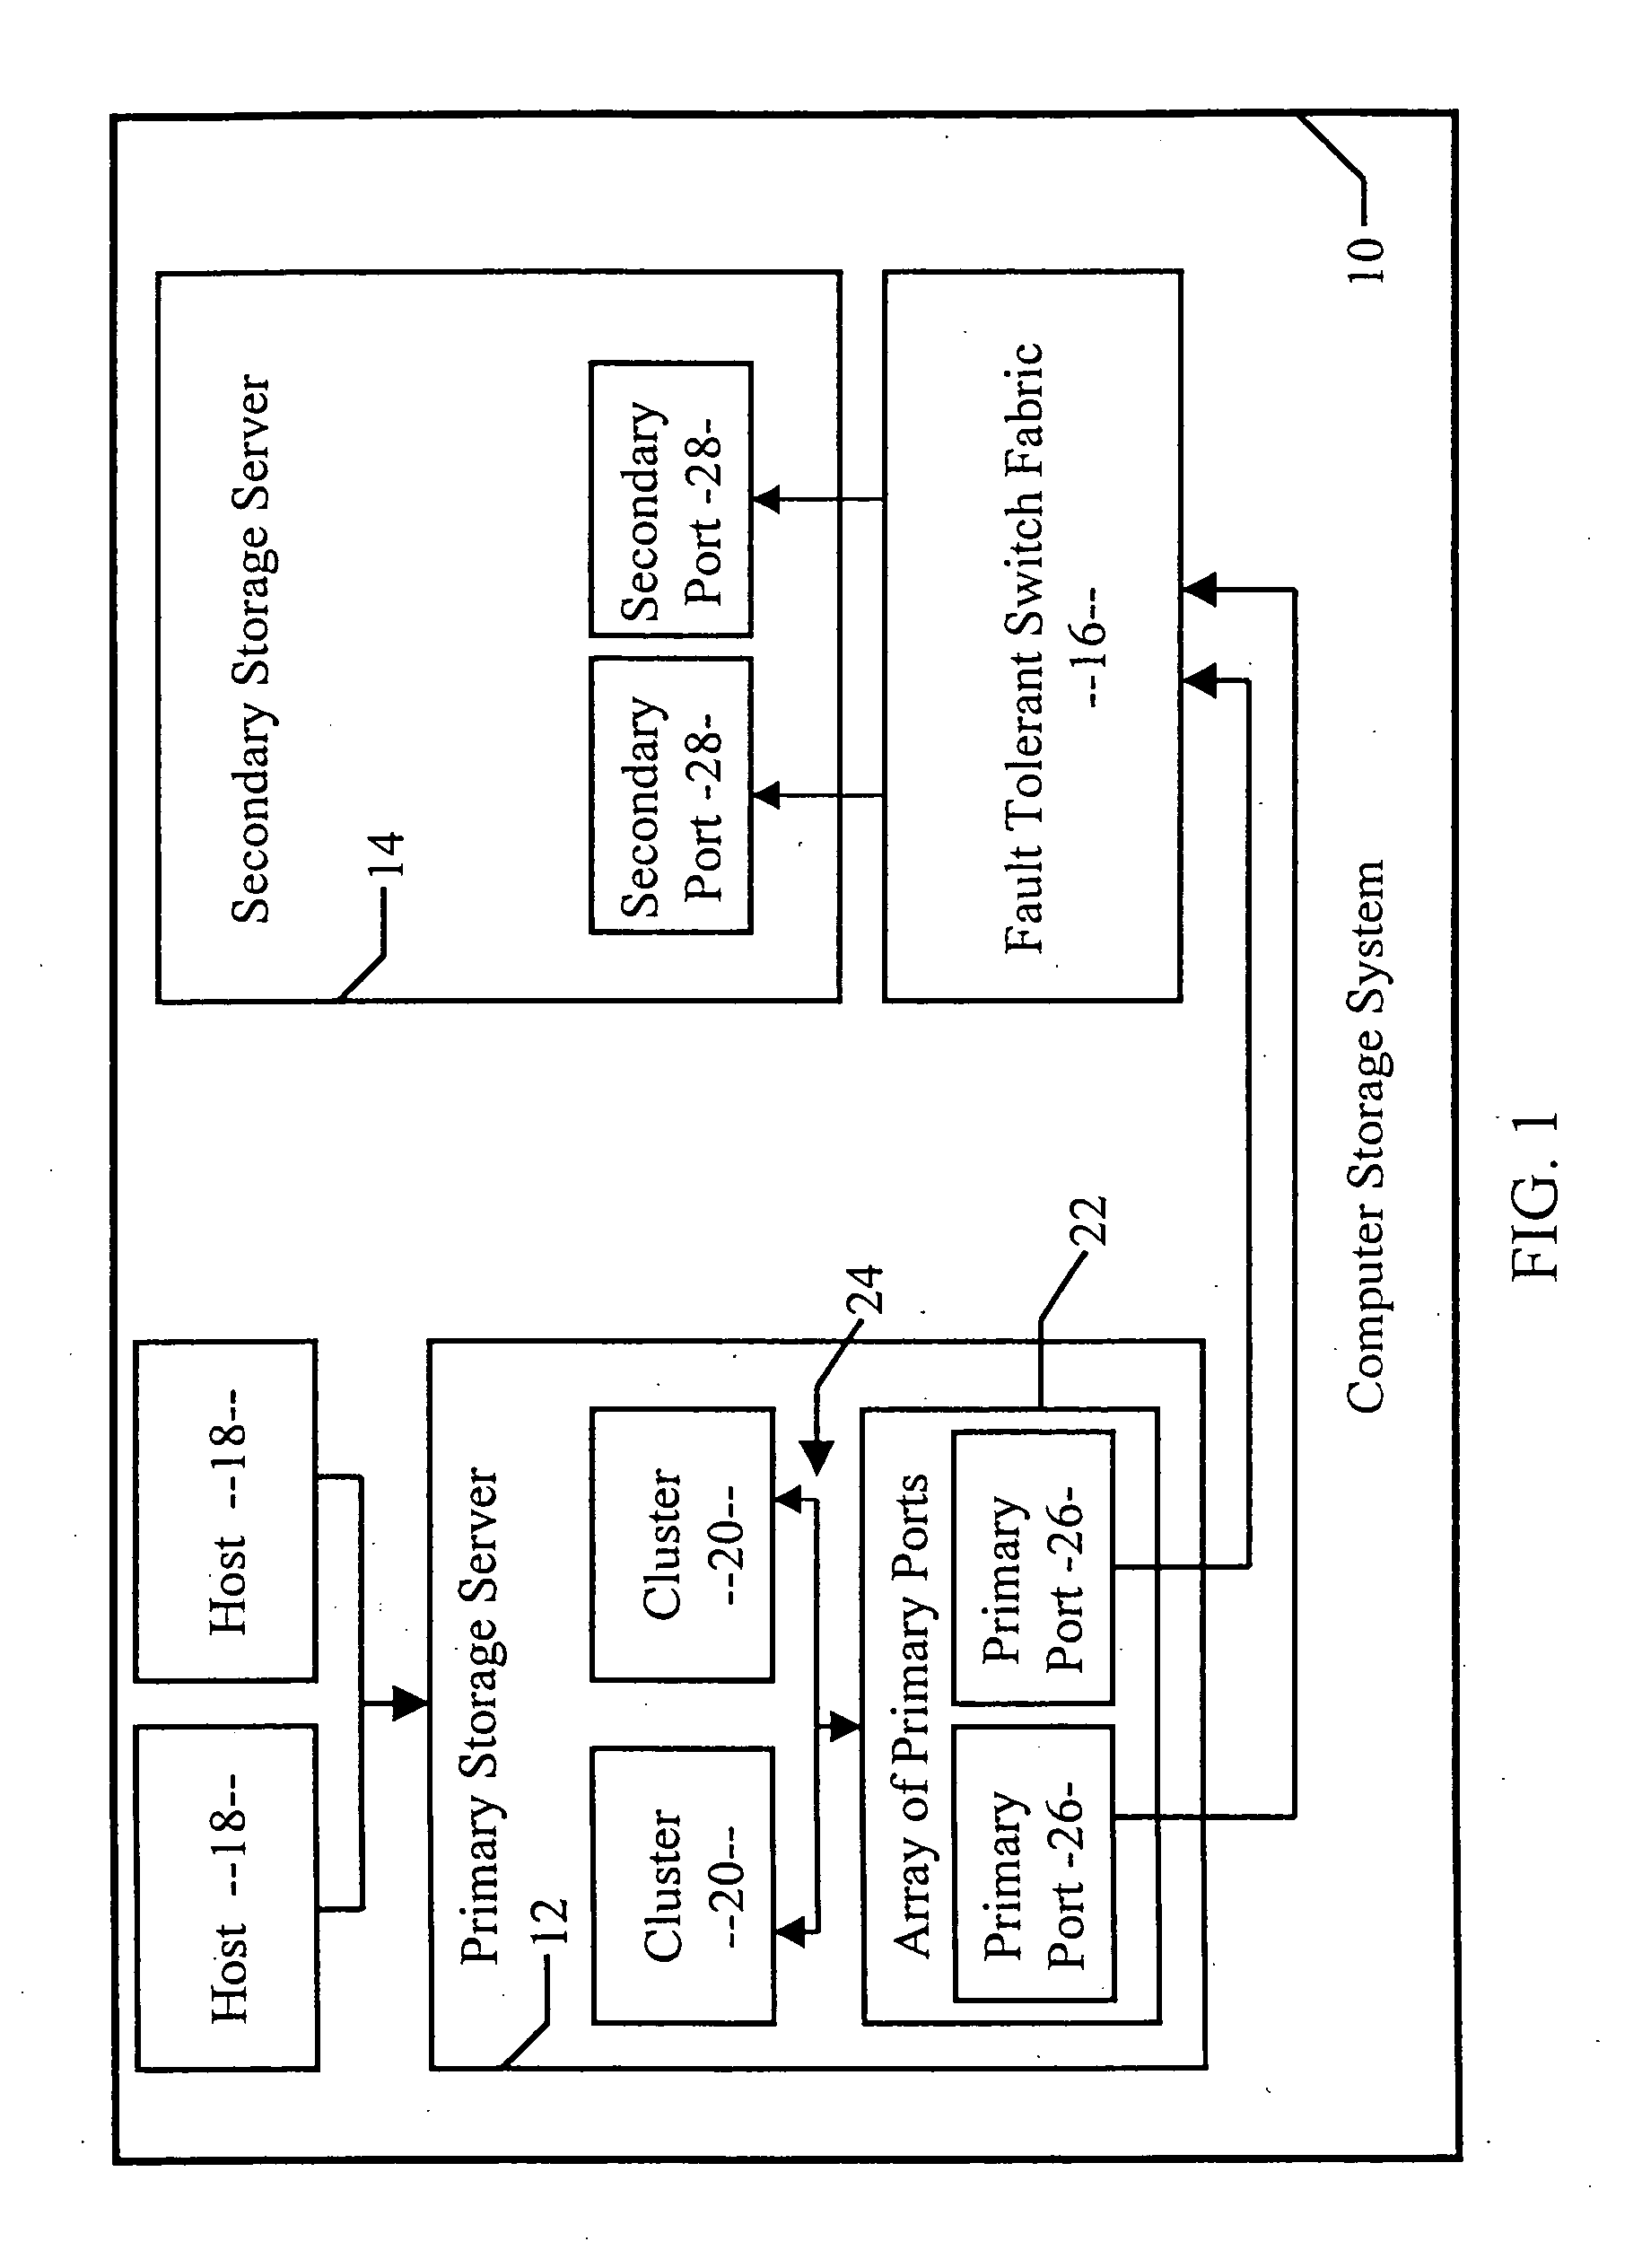 Method of balancing work load with prioritized tasks across a multitude of communication ports